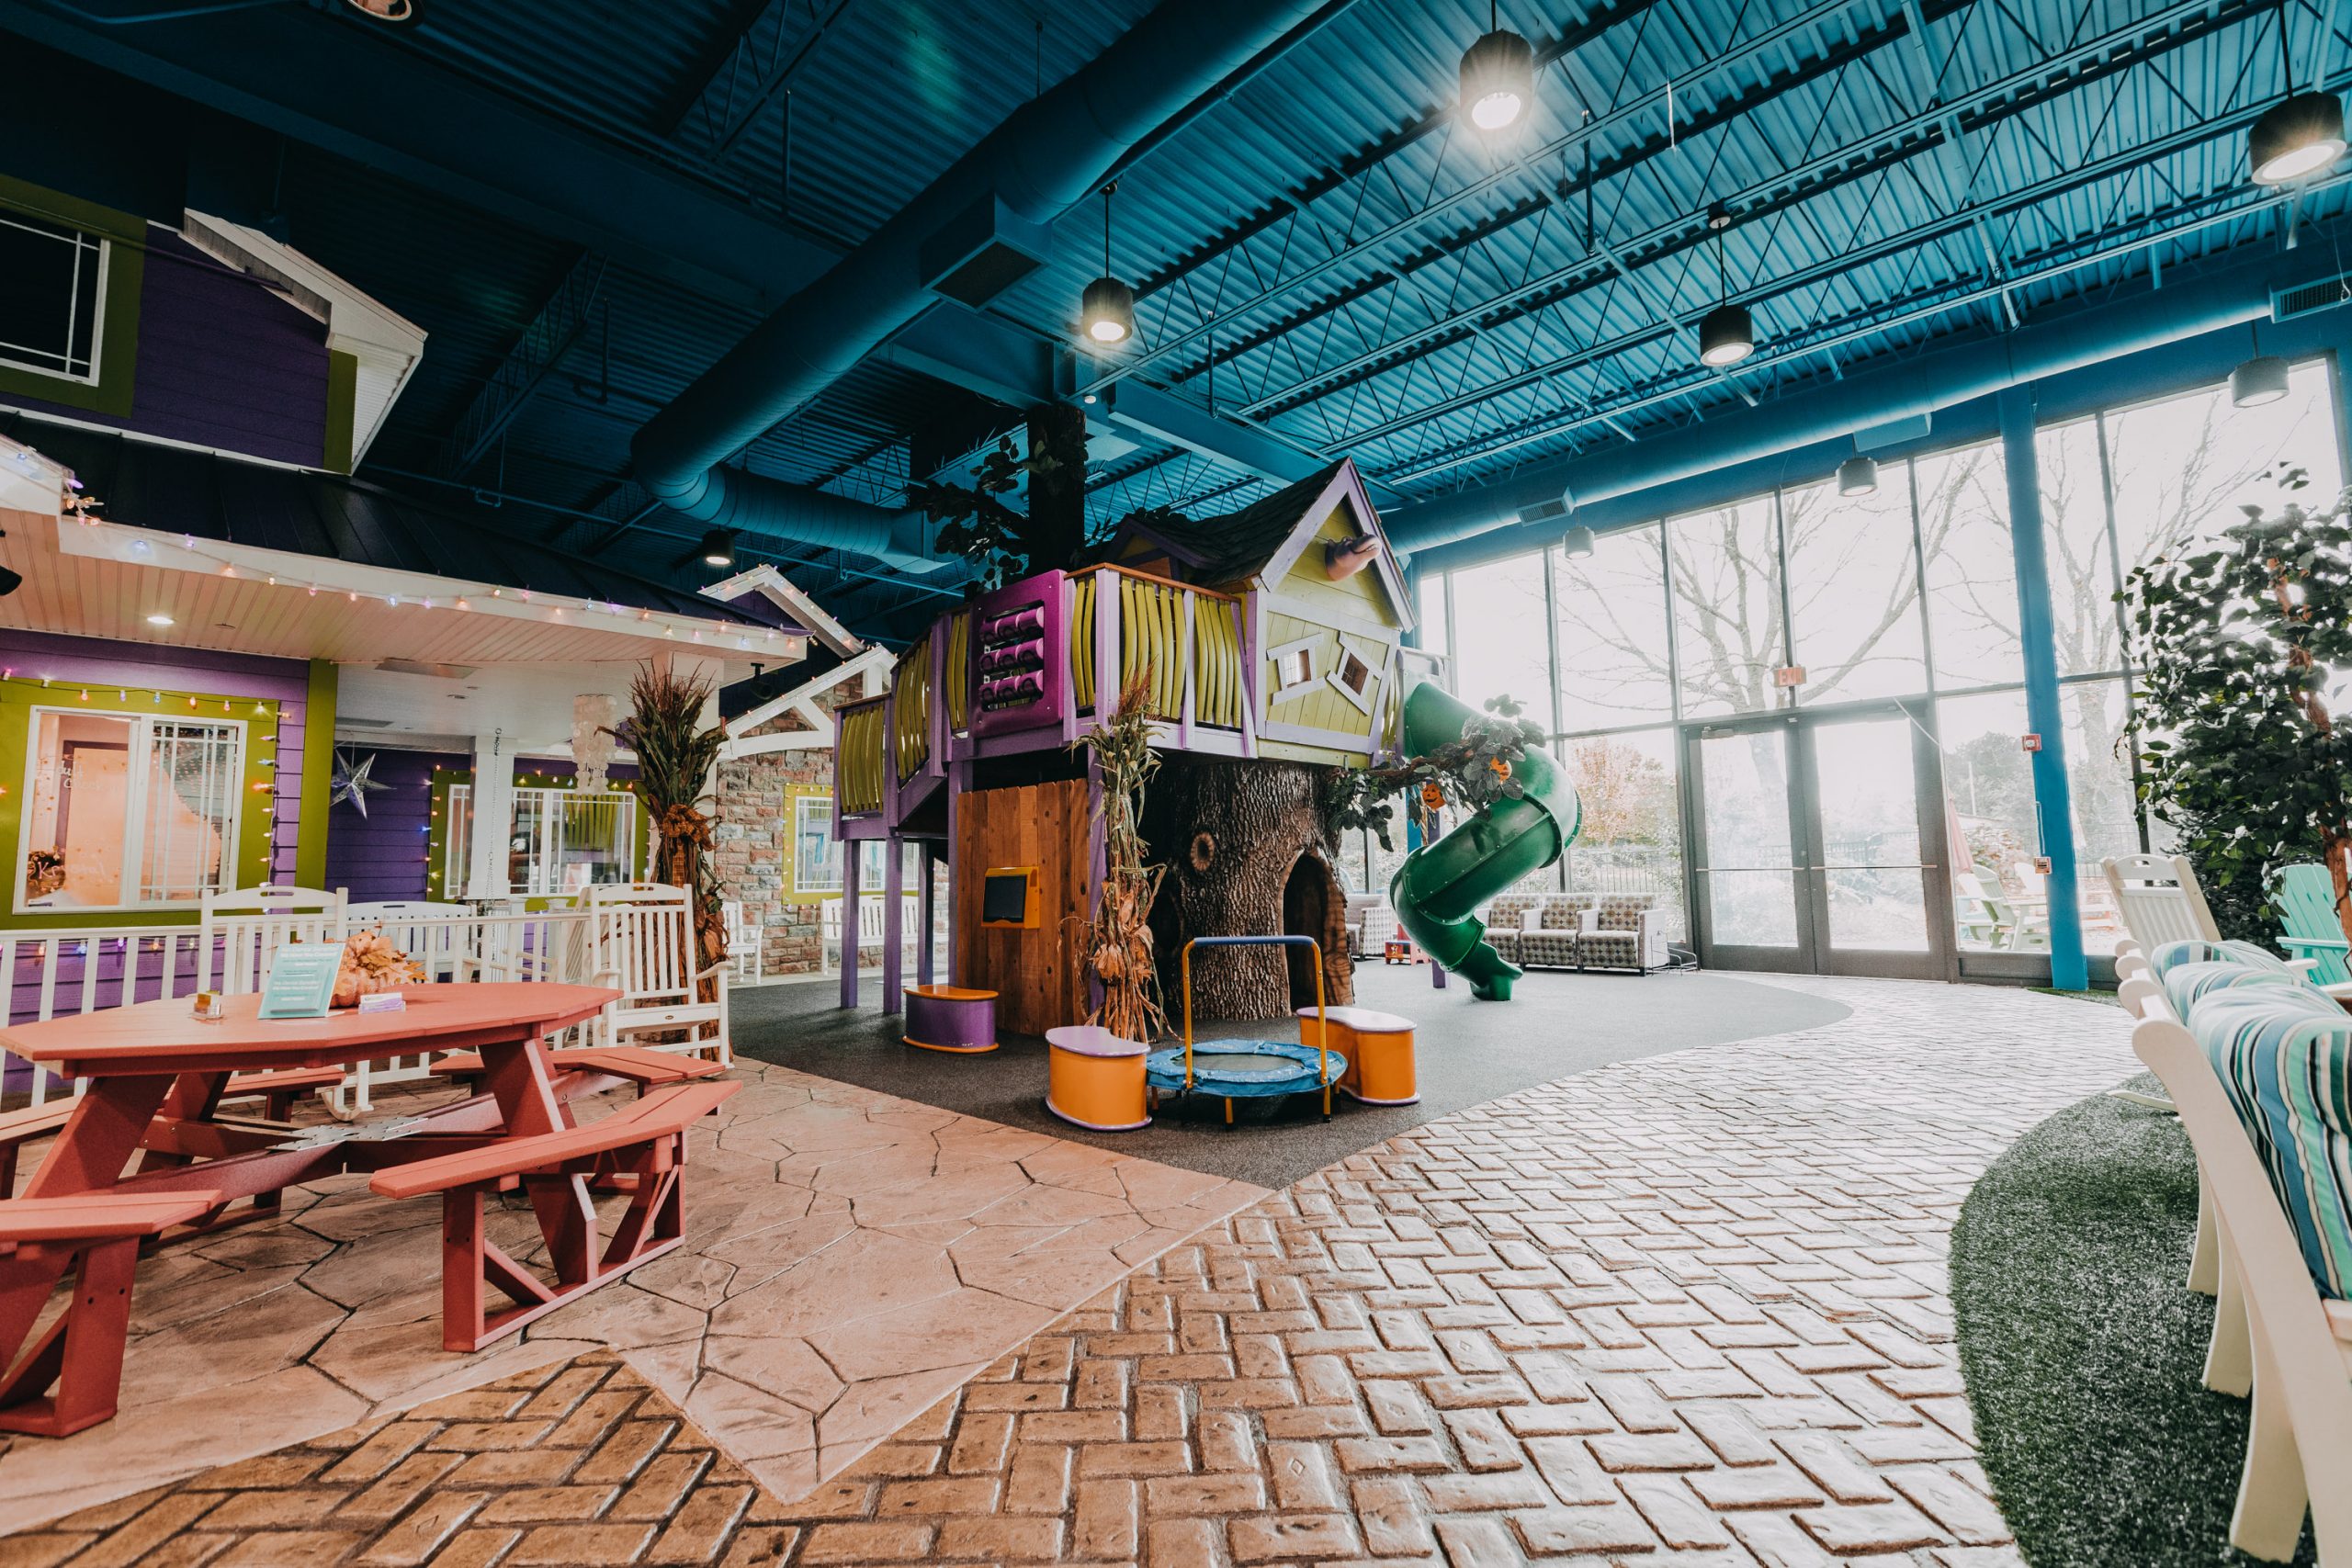 Newtown Dentistry dental home with indoor treehouse and slide with red picnic benches and brick floor.